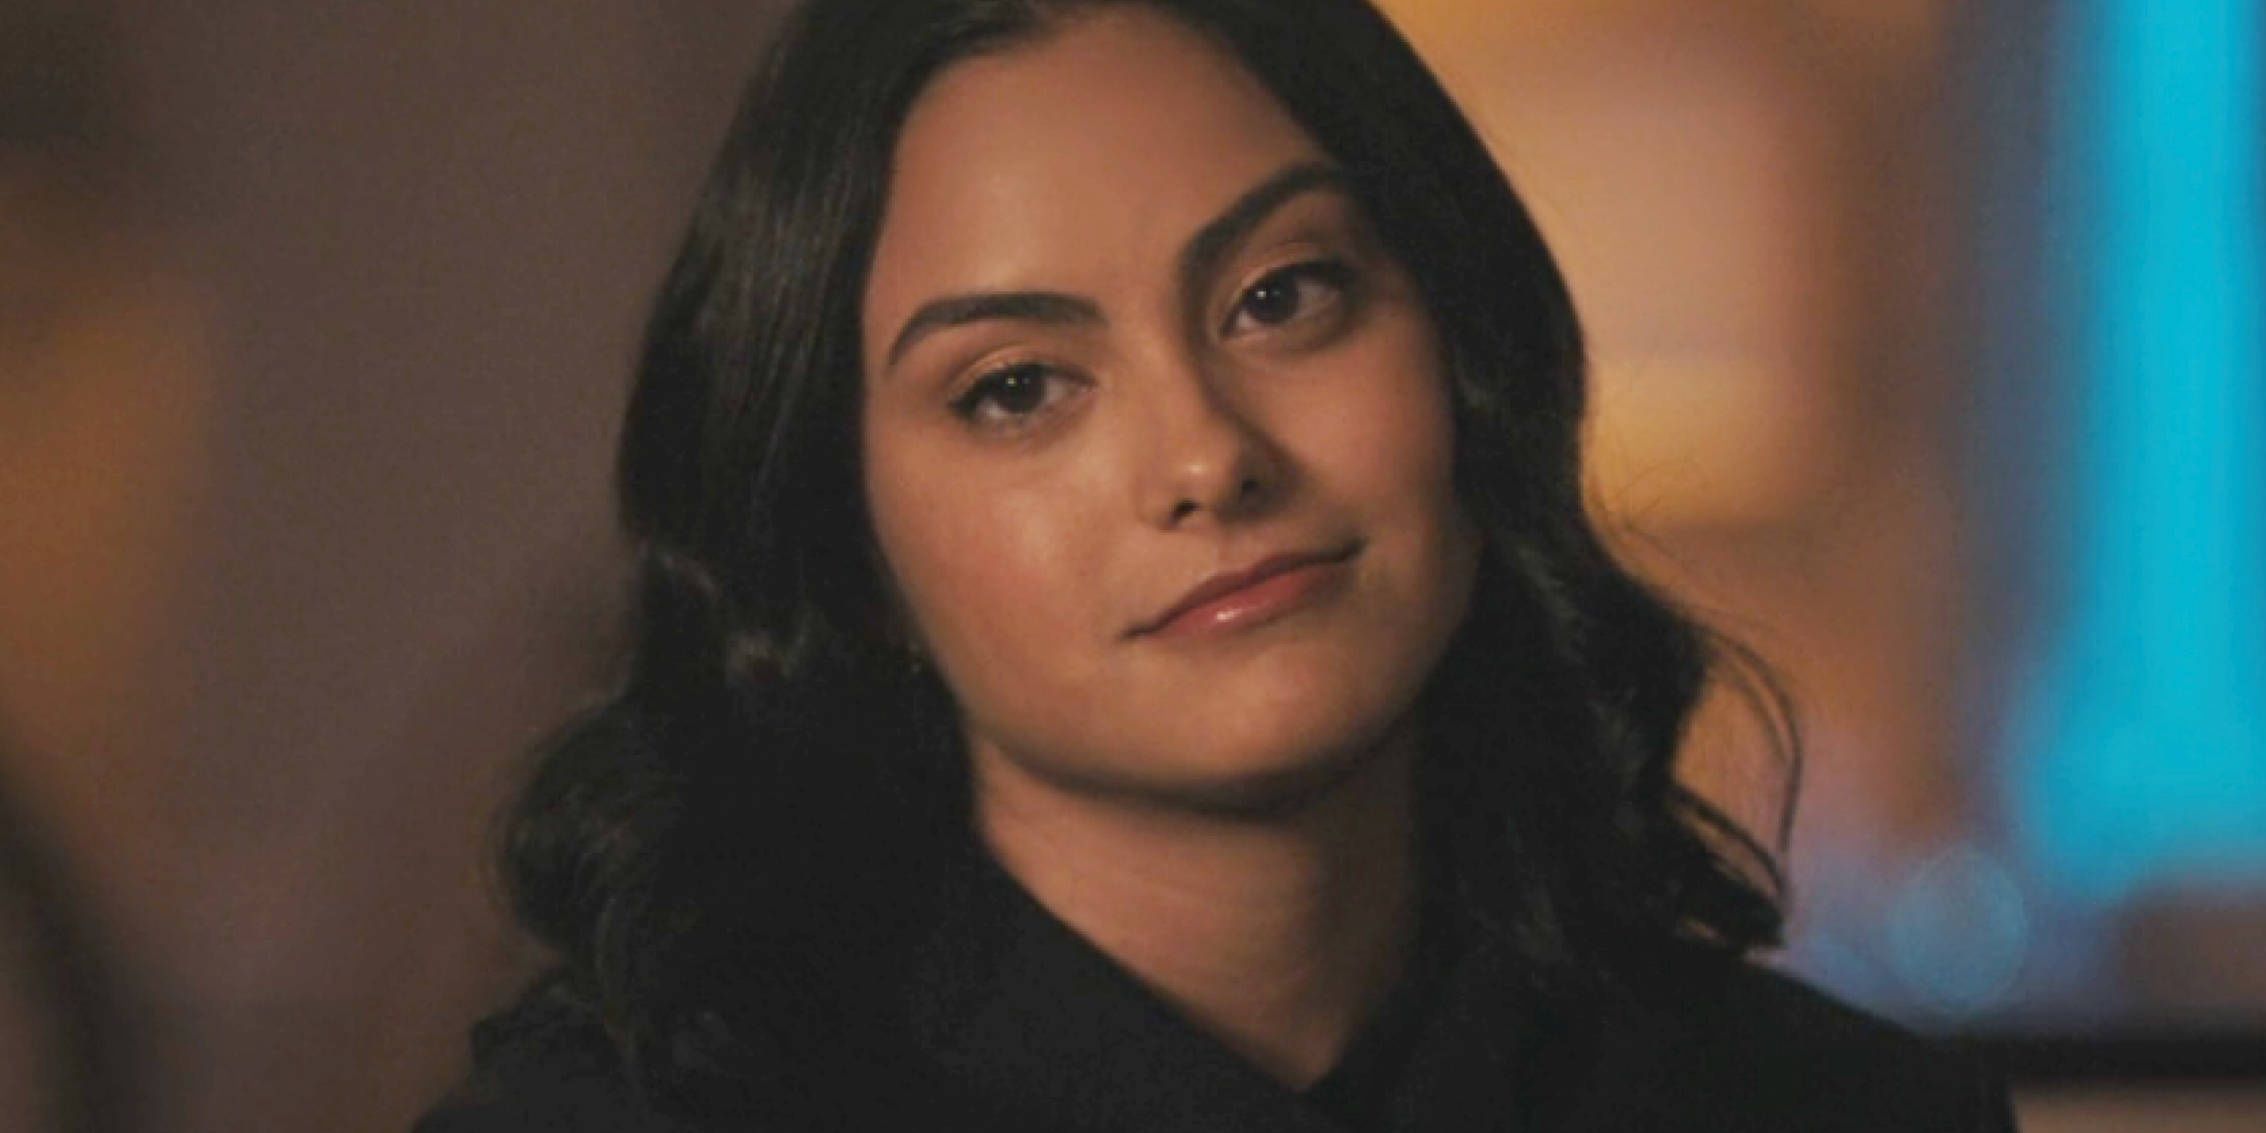 Veronica gives a small smile while tilting her head in Riverdale